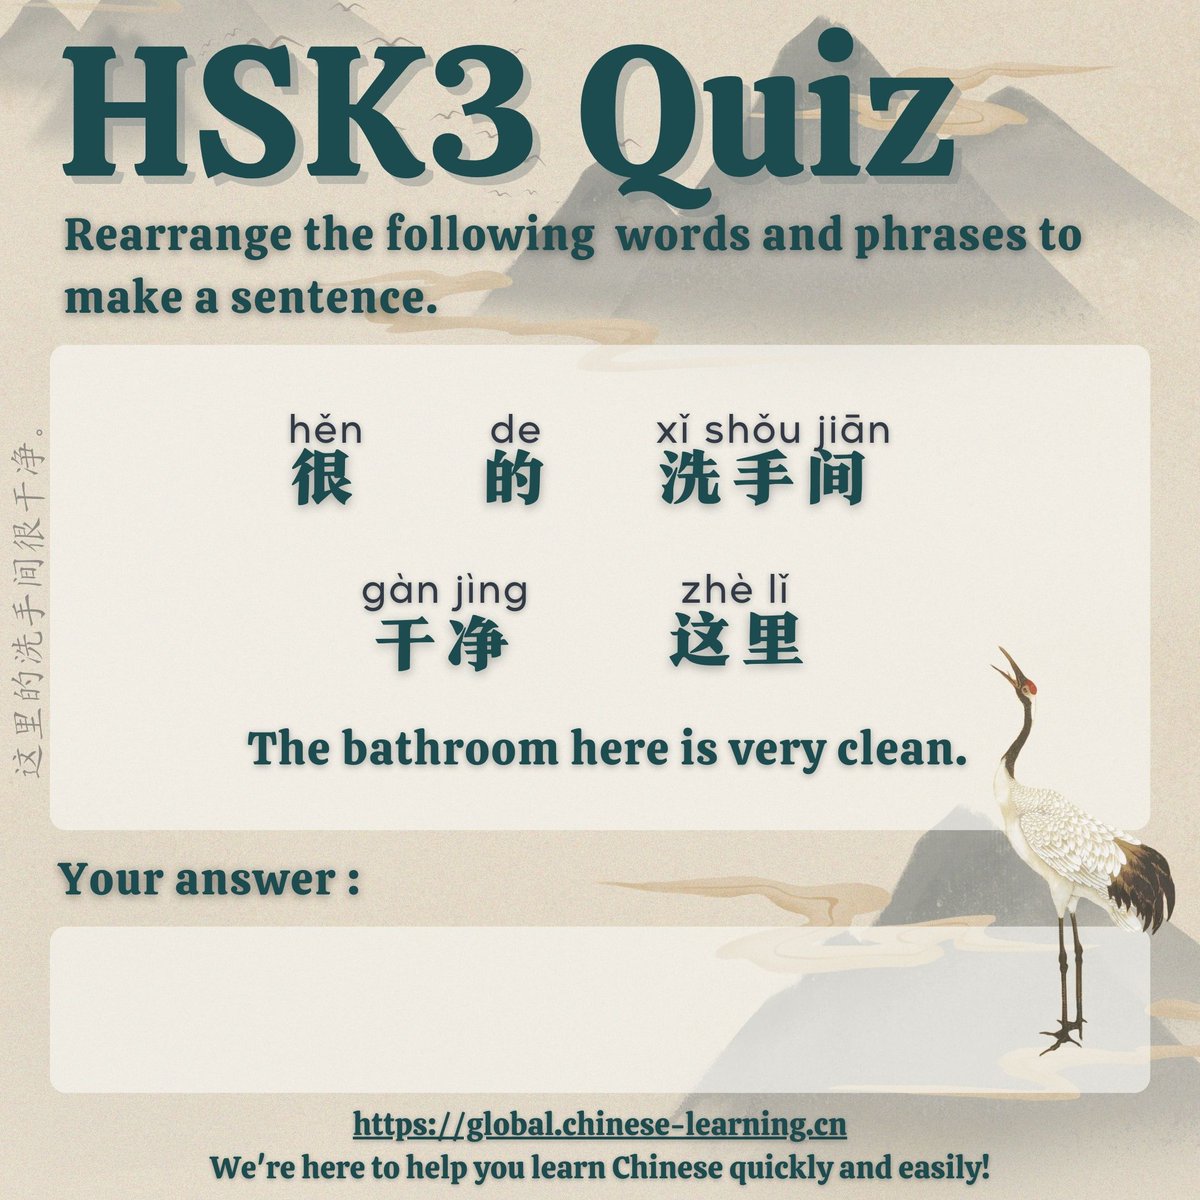 HSK3 Quiz Rearrange the following words and phrase to make a sentence #Chinese #学中文 #汉语 #studytwt #Chinese #mandarin #learnchinese #Chineselearning #HSK #学汉语